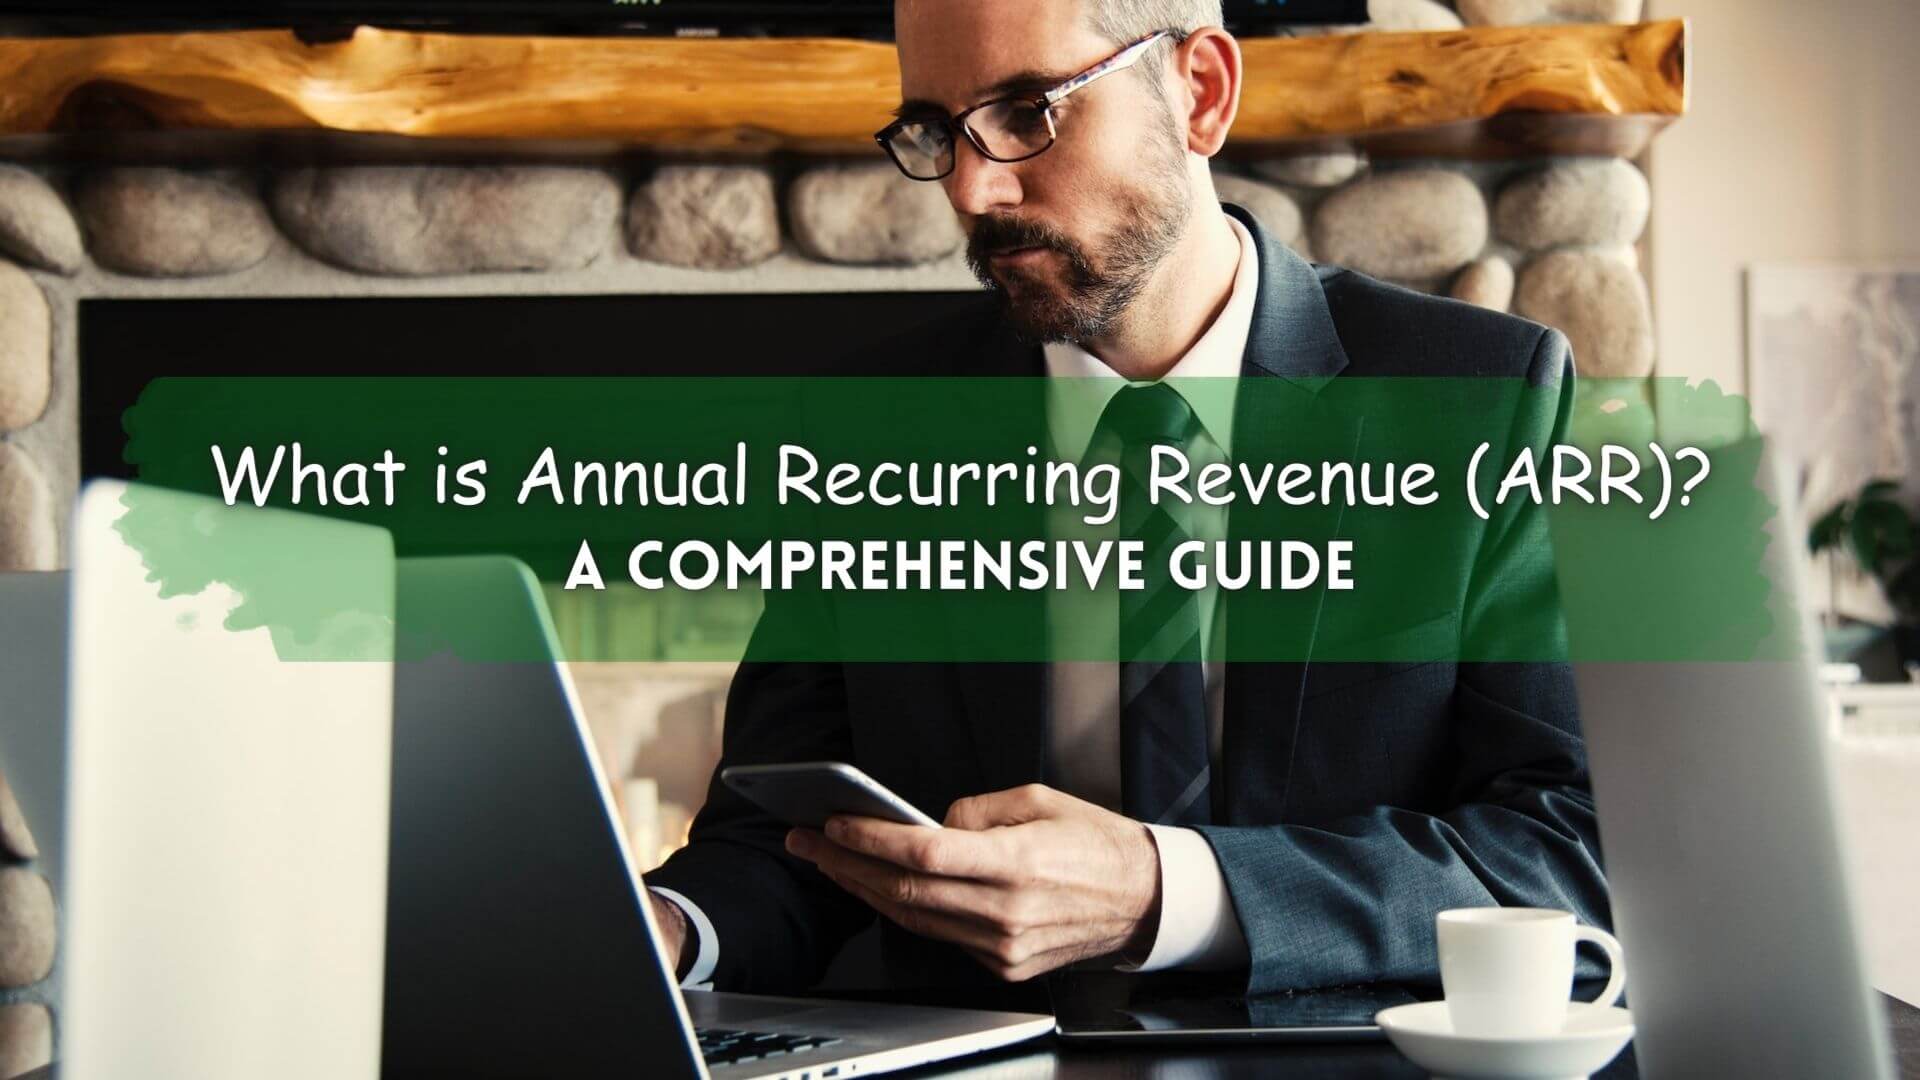 As the subscription-based business model has become popular, understanding Annual Recurring Revenue is essential for success. Learn more!